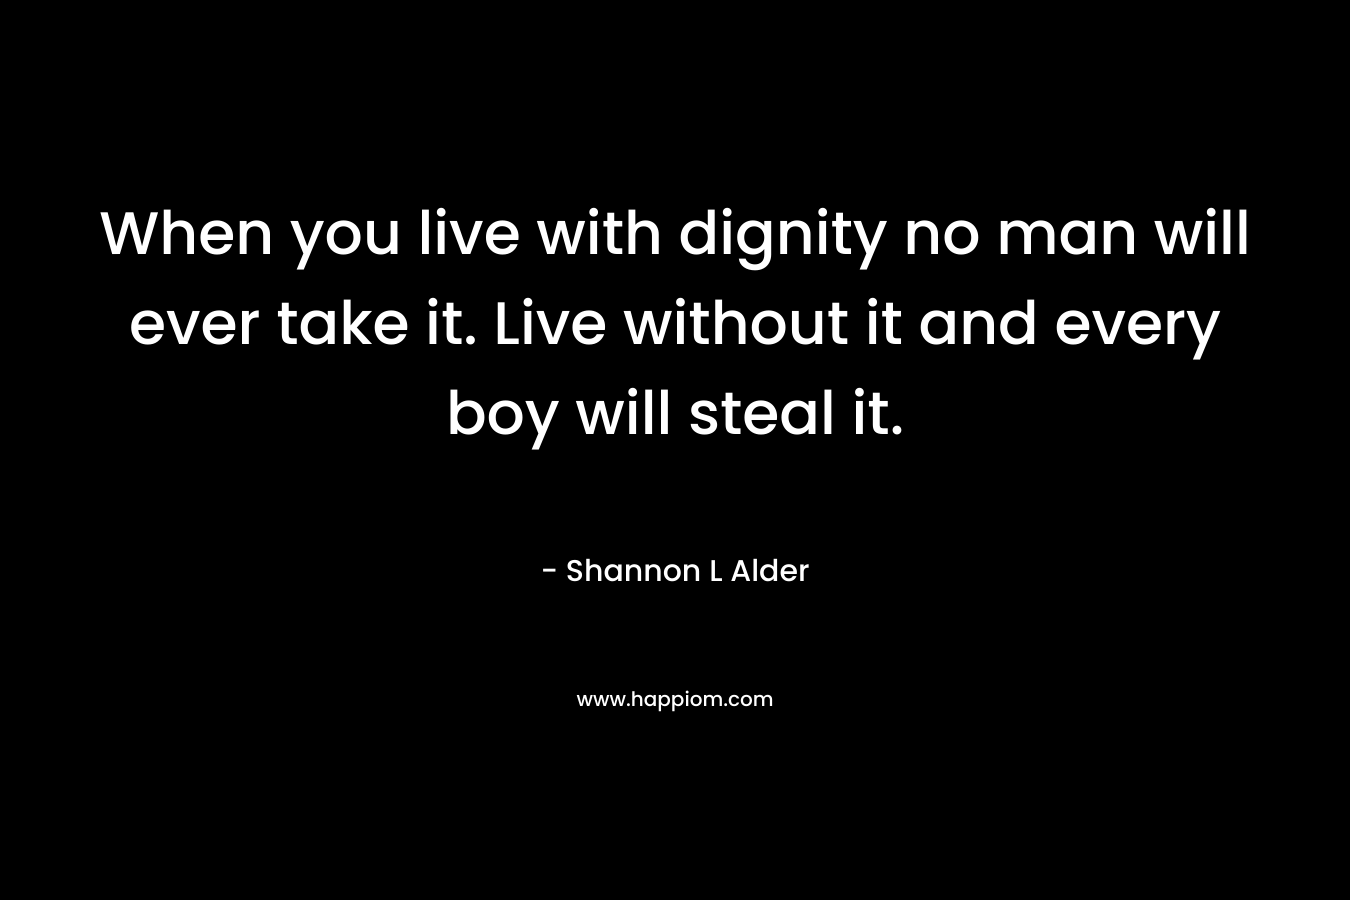 When you live with dignity no man will ever take it. Live without it and every boy will steal it.